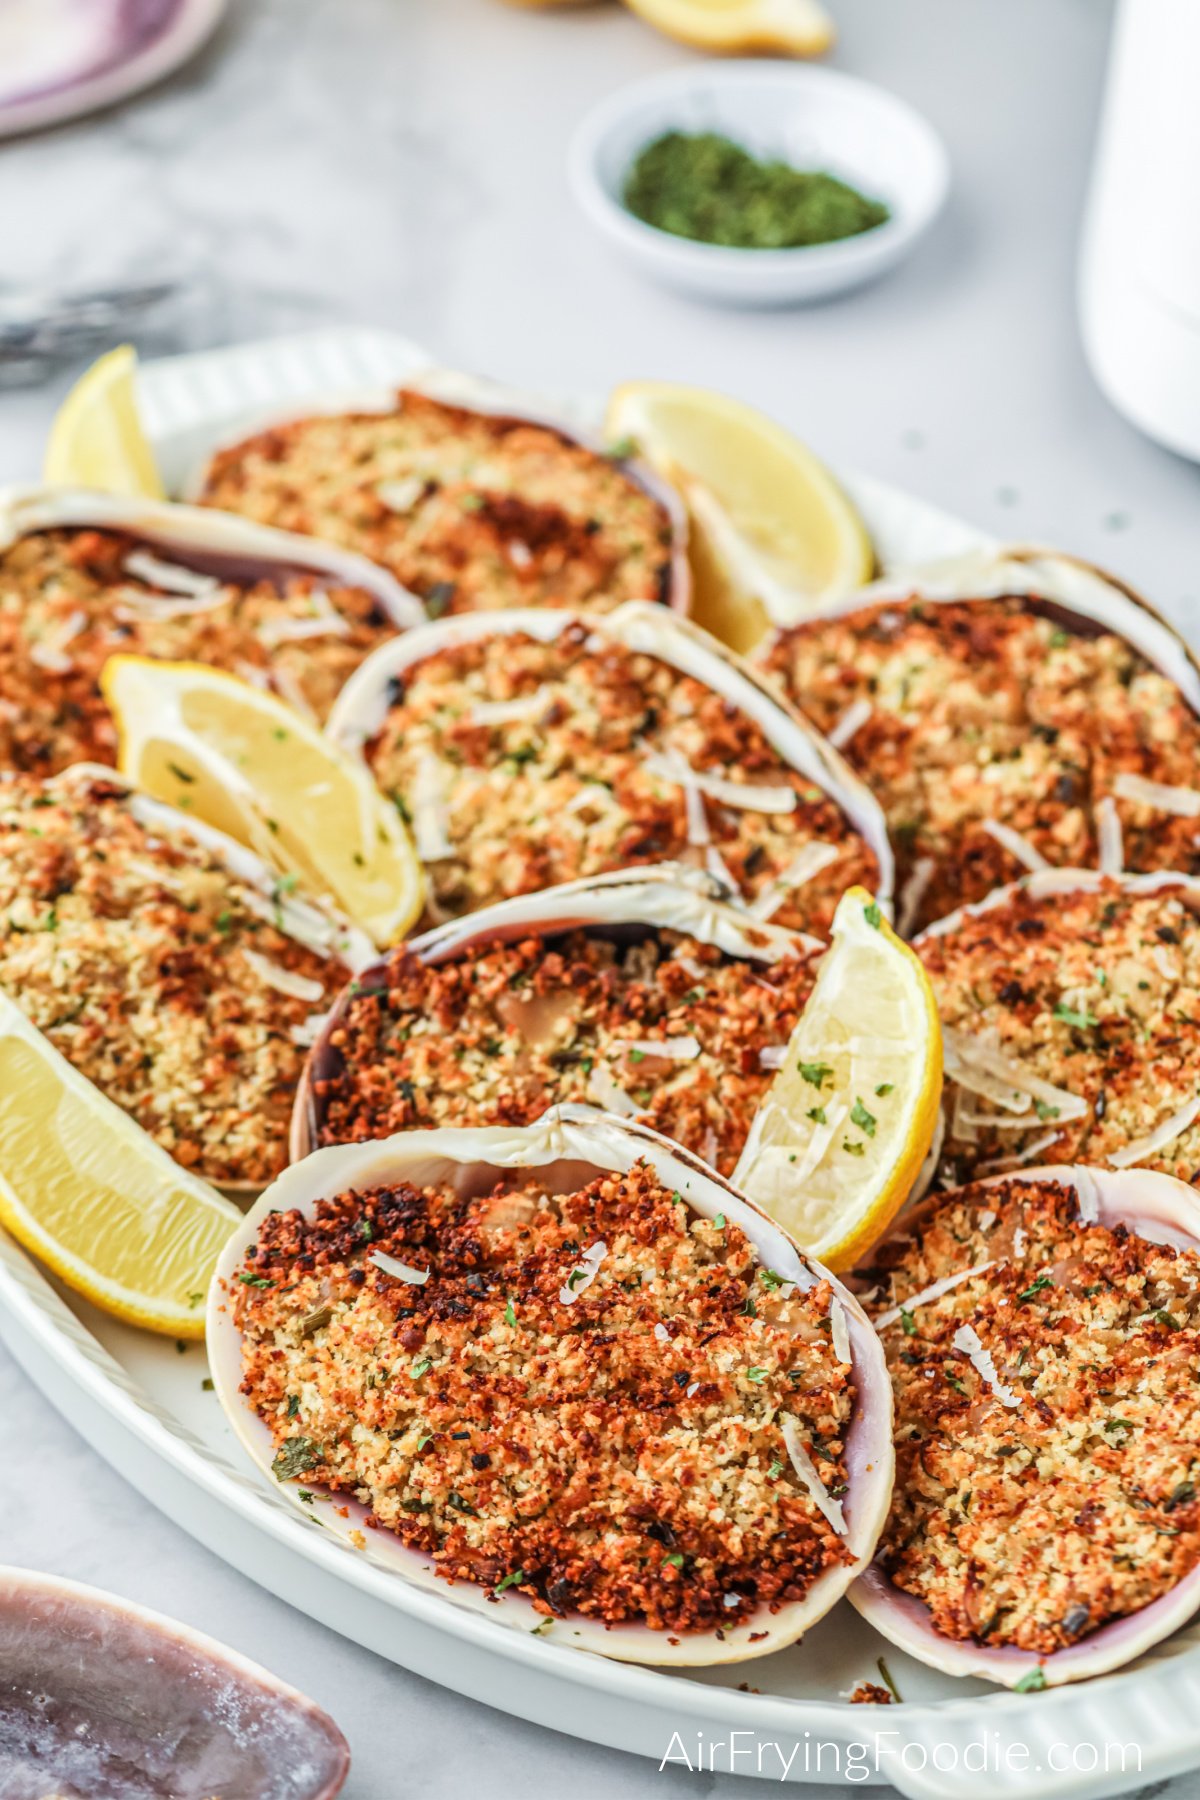 Air fried stuffed clams on a white plate with lemon wedges, ready to serve.